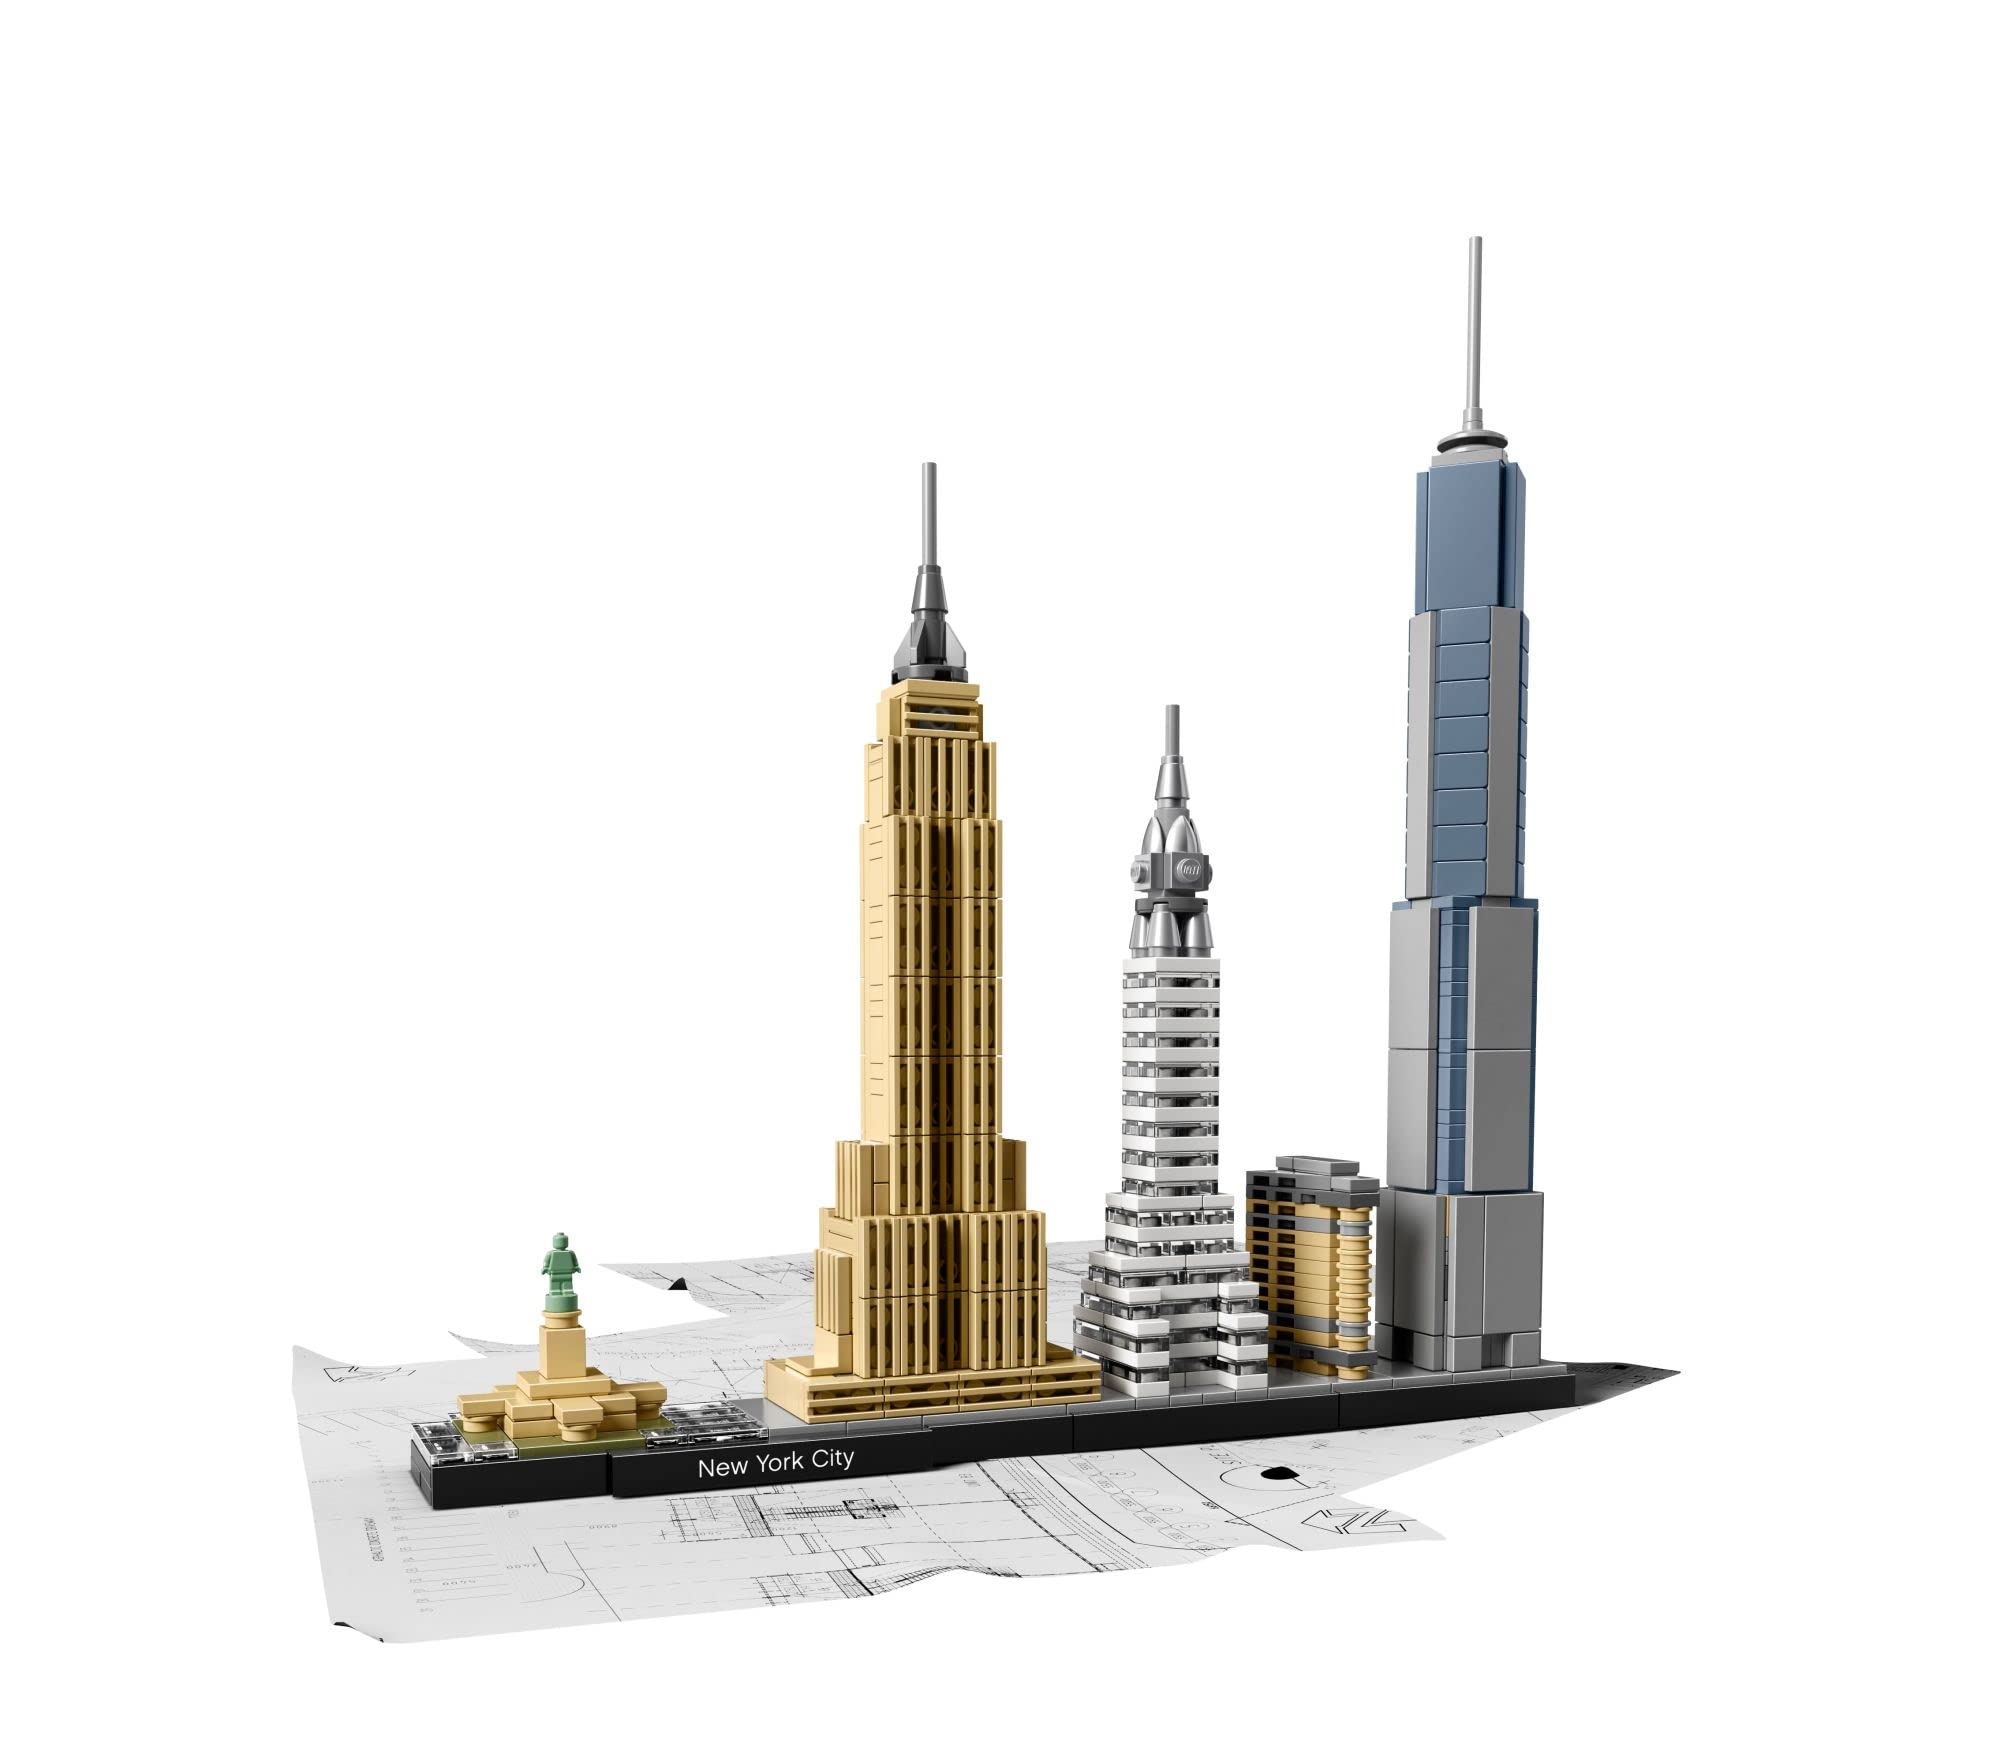 LEGO Architecture New York City Skyline 21028, Collectible Model Kit for Adults to Build, Creative Activity, Home Décor Gift Idea